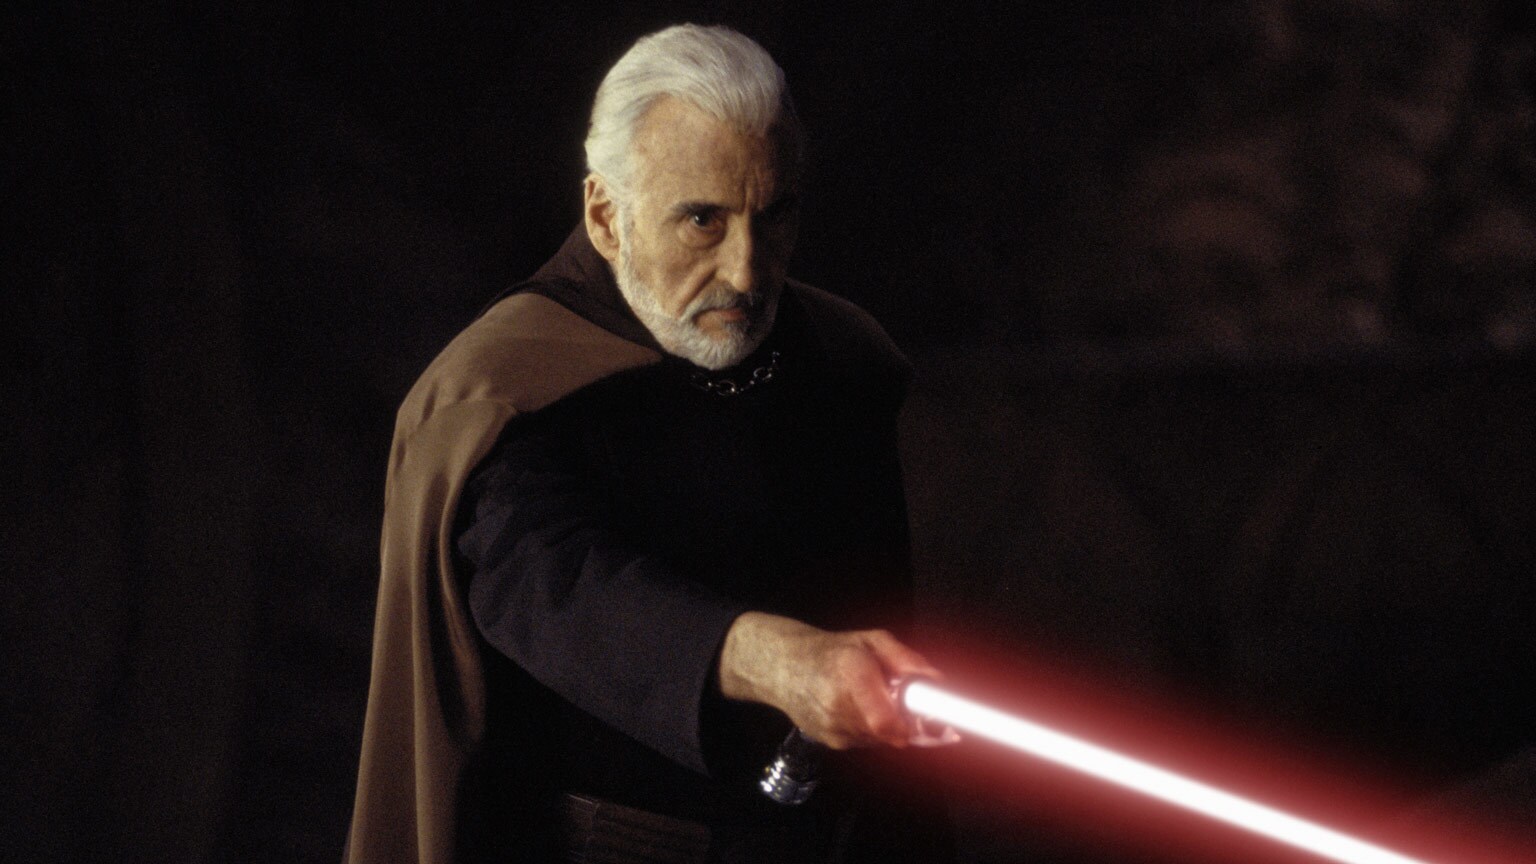 Count Dooku with his lightsaber ignited in Star Wars: Attack of the Clones.